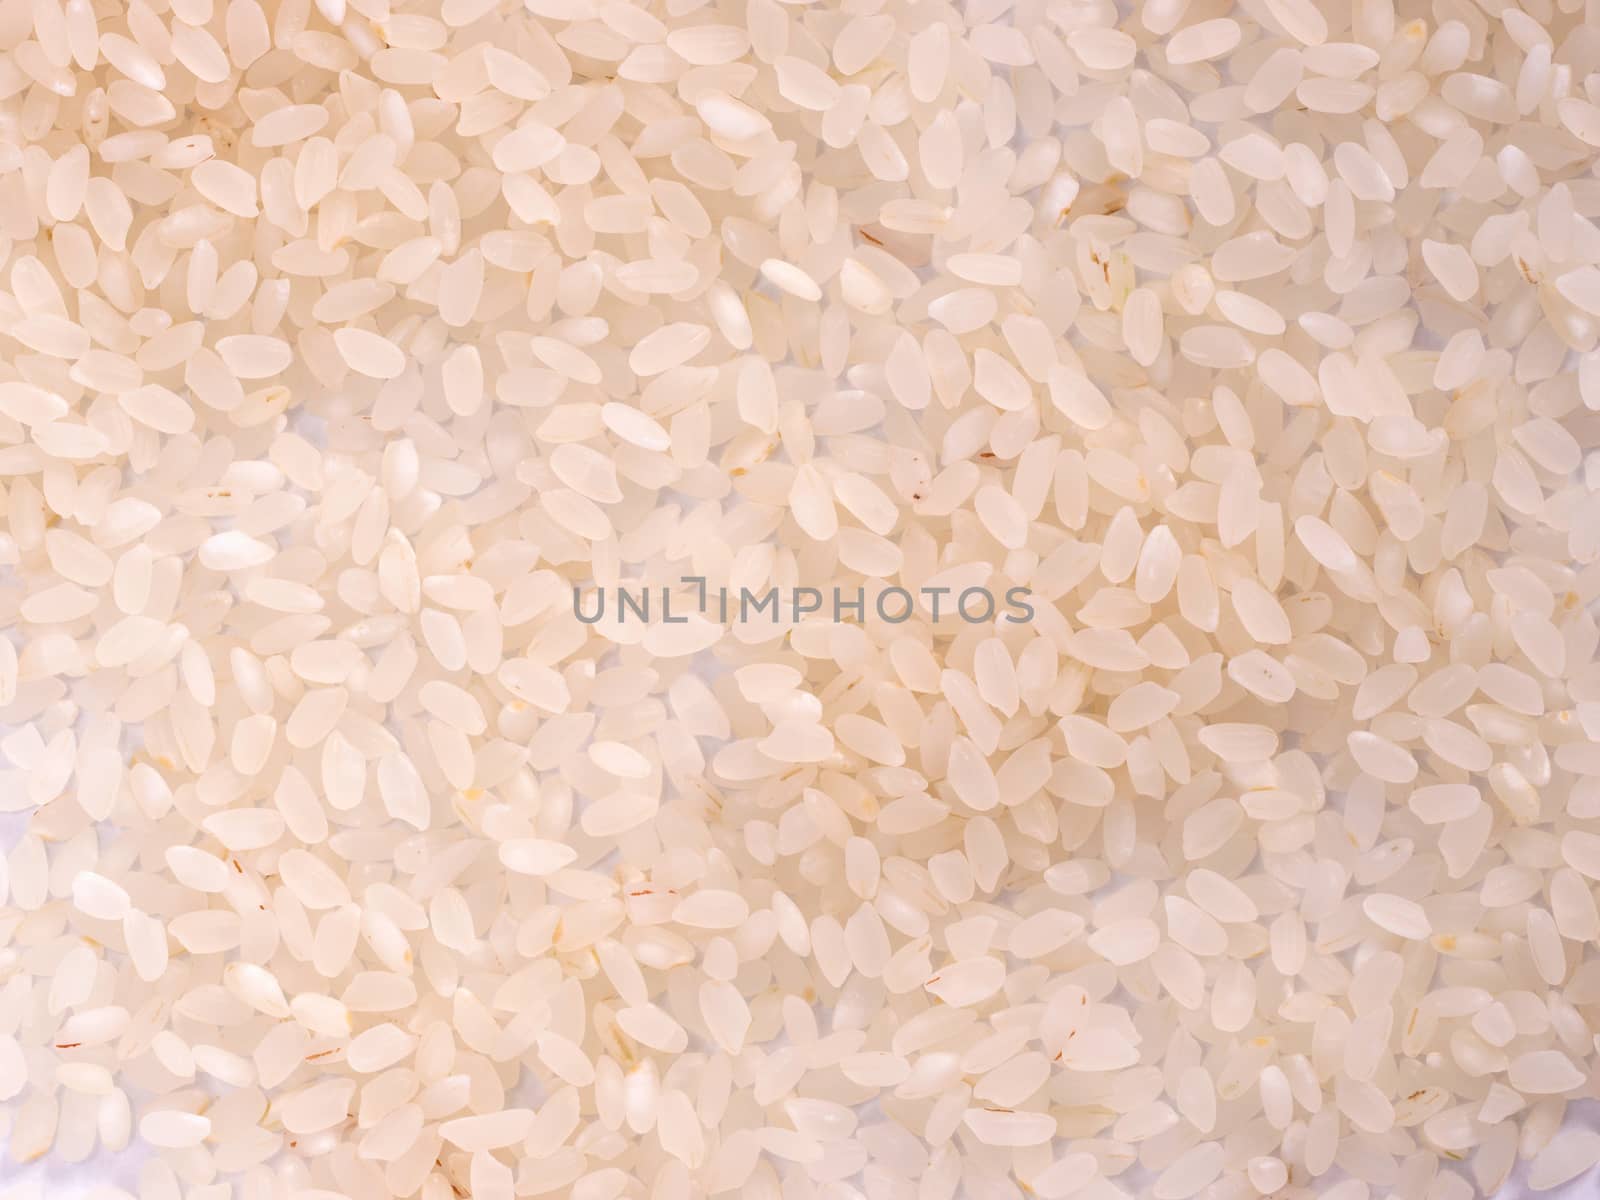 rice texture as background. Flat lay or top view